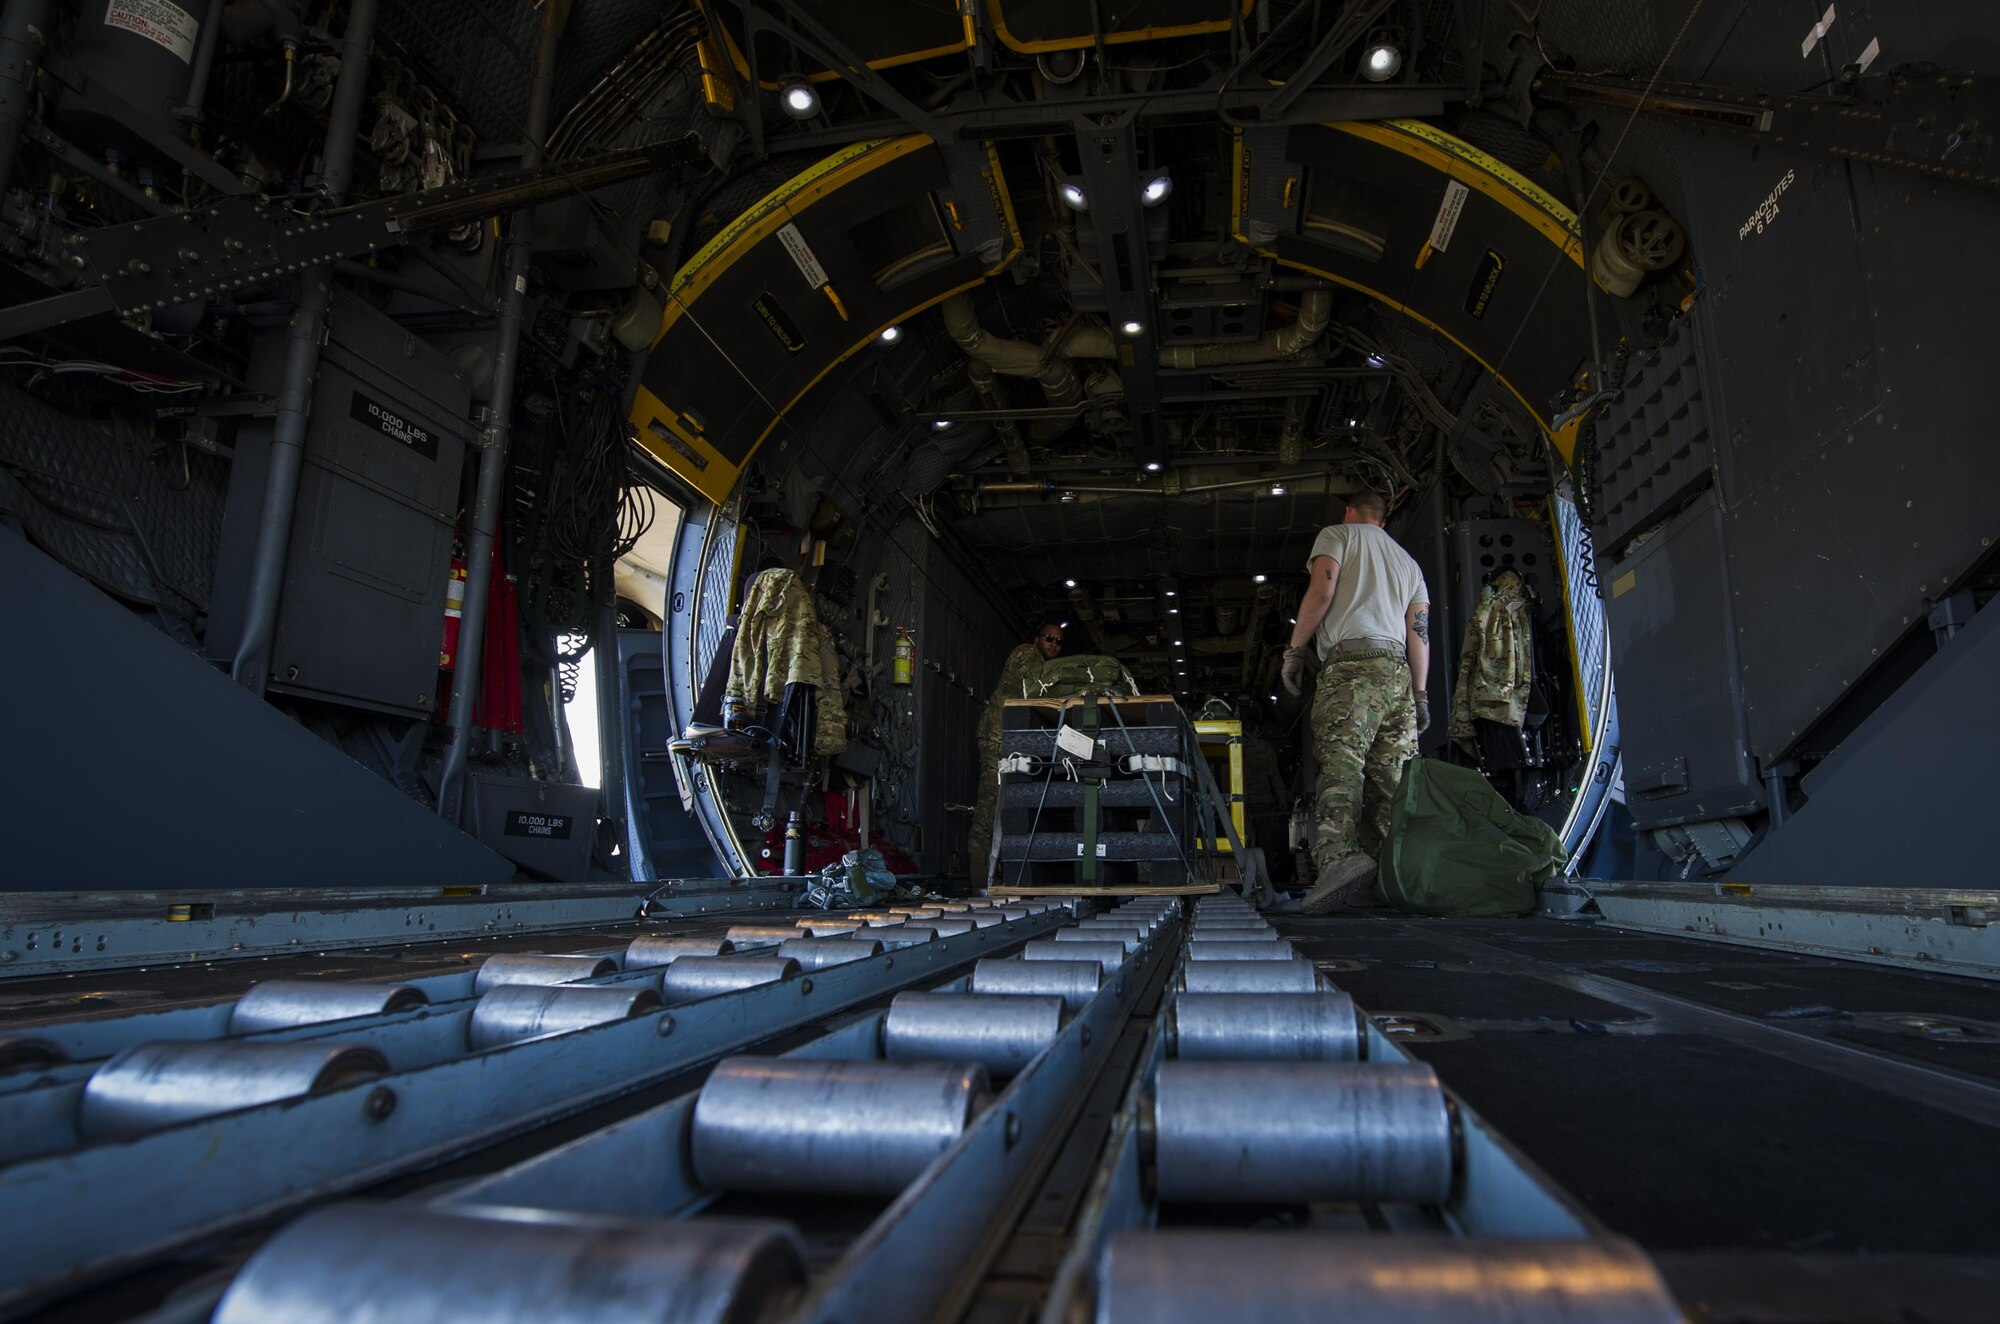 Loadmasters with the 15th Special Operations Squadron transport a container delivery system onto an MC-130 Combat Talon II at Hurlburt Field, Fla., April 7, 2017. The container delivery system is the most commonly used method for the quick, aerial insertion of supplies for military operations ensuring global reach anytime, anyplace. (U.S. Air Force photo by Airman 1st Class Joseph Pick)